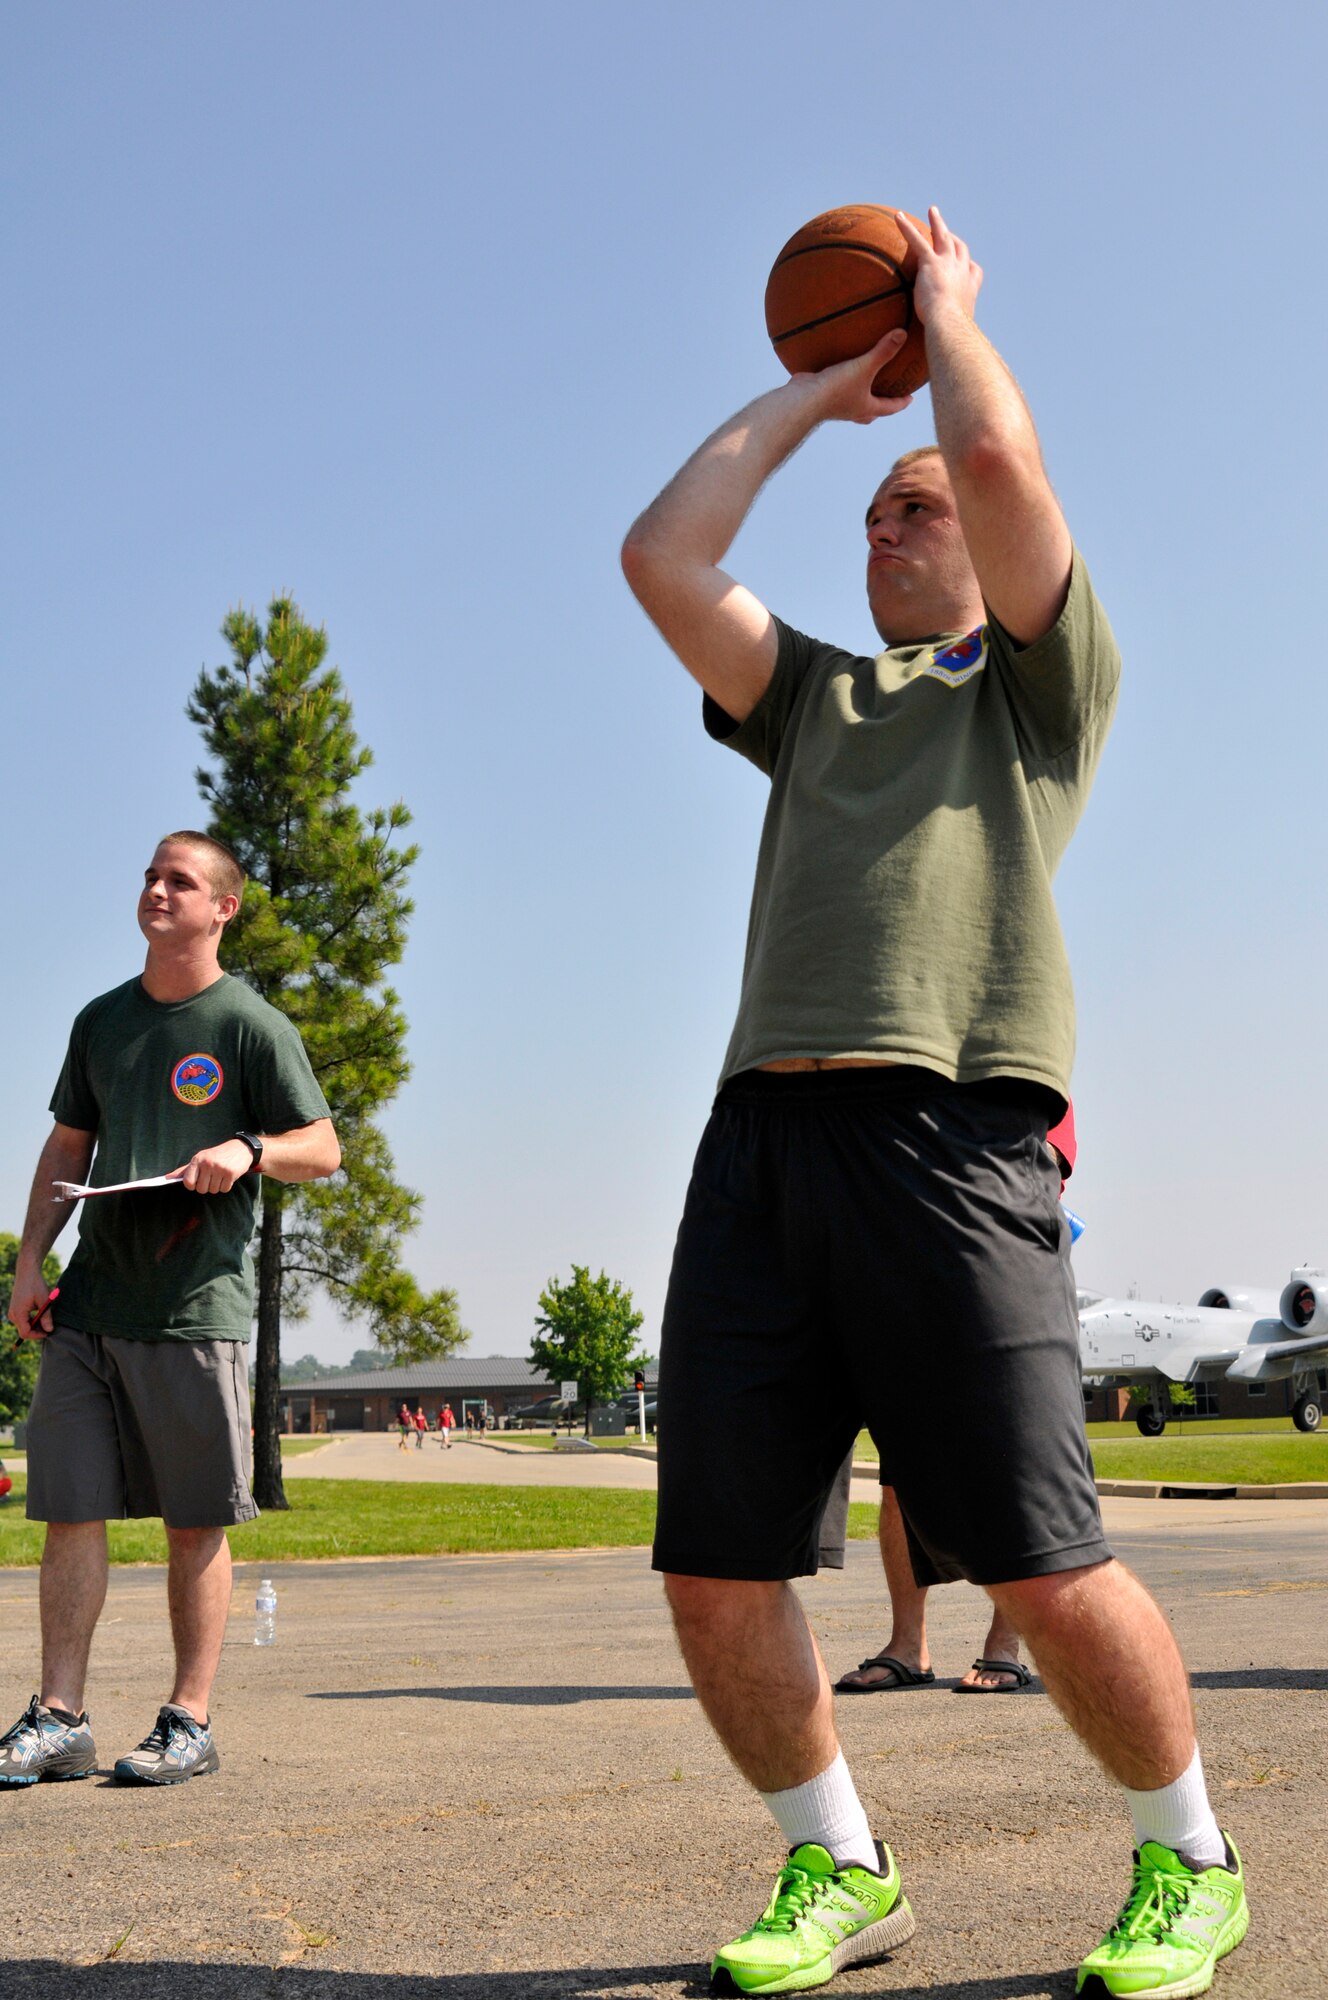 Members of the 188th Wing gathered together to compete in multiple physical challenges for Wingman day 2015 held June 7, at Ebbing Air National Guard Base, Fort Smith, Ark. Wingman Day is designed to encourage Airmen to build and foster positive relationships in their work areas and throughout the wing. The day’s events consisted of a 1.5 mile run, volleyball, horseshoes, a mile relay, free-throw competition, golf pitching and a casting contest. Brig. Gen. James Vogel, Arkansas Air National Guard commander, and Col. Bobbi Doorenbos, 188th Wing commander, presented awards to team winners at the conclusion of the day’s events. (U.S. Air National Guard photo by Staff Sgt. John Suleski/Released)